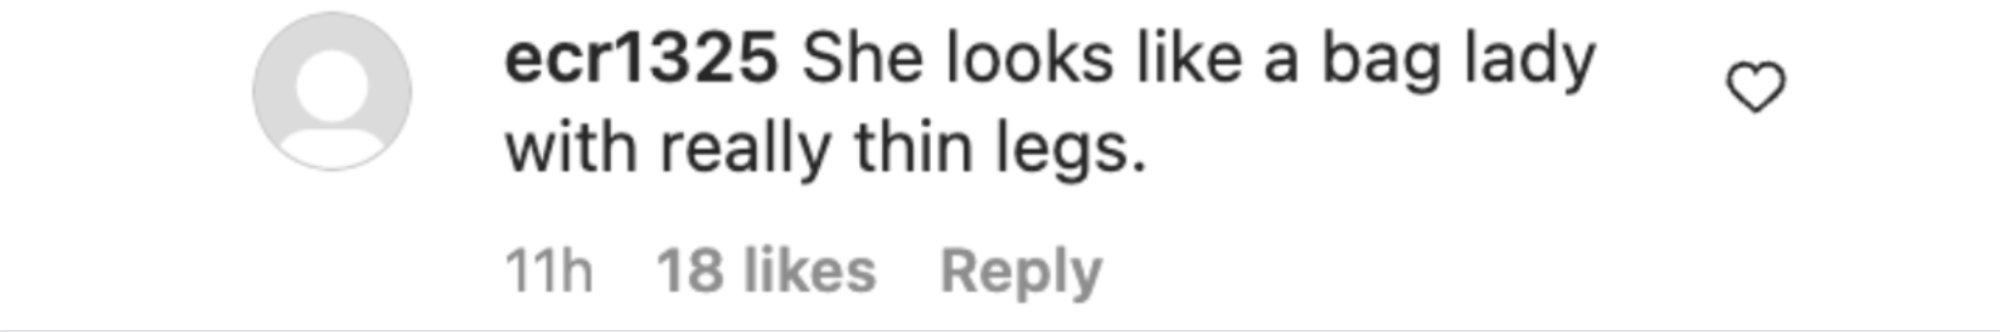 A comment left under a photo of Kathie Lee Gifford and Richard Spitz | Source: Instagram.com/pagesix